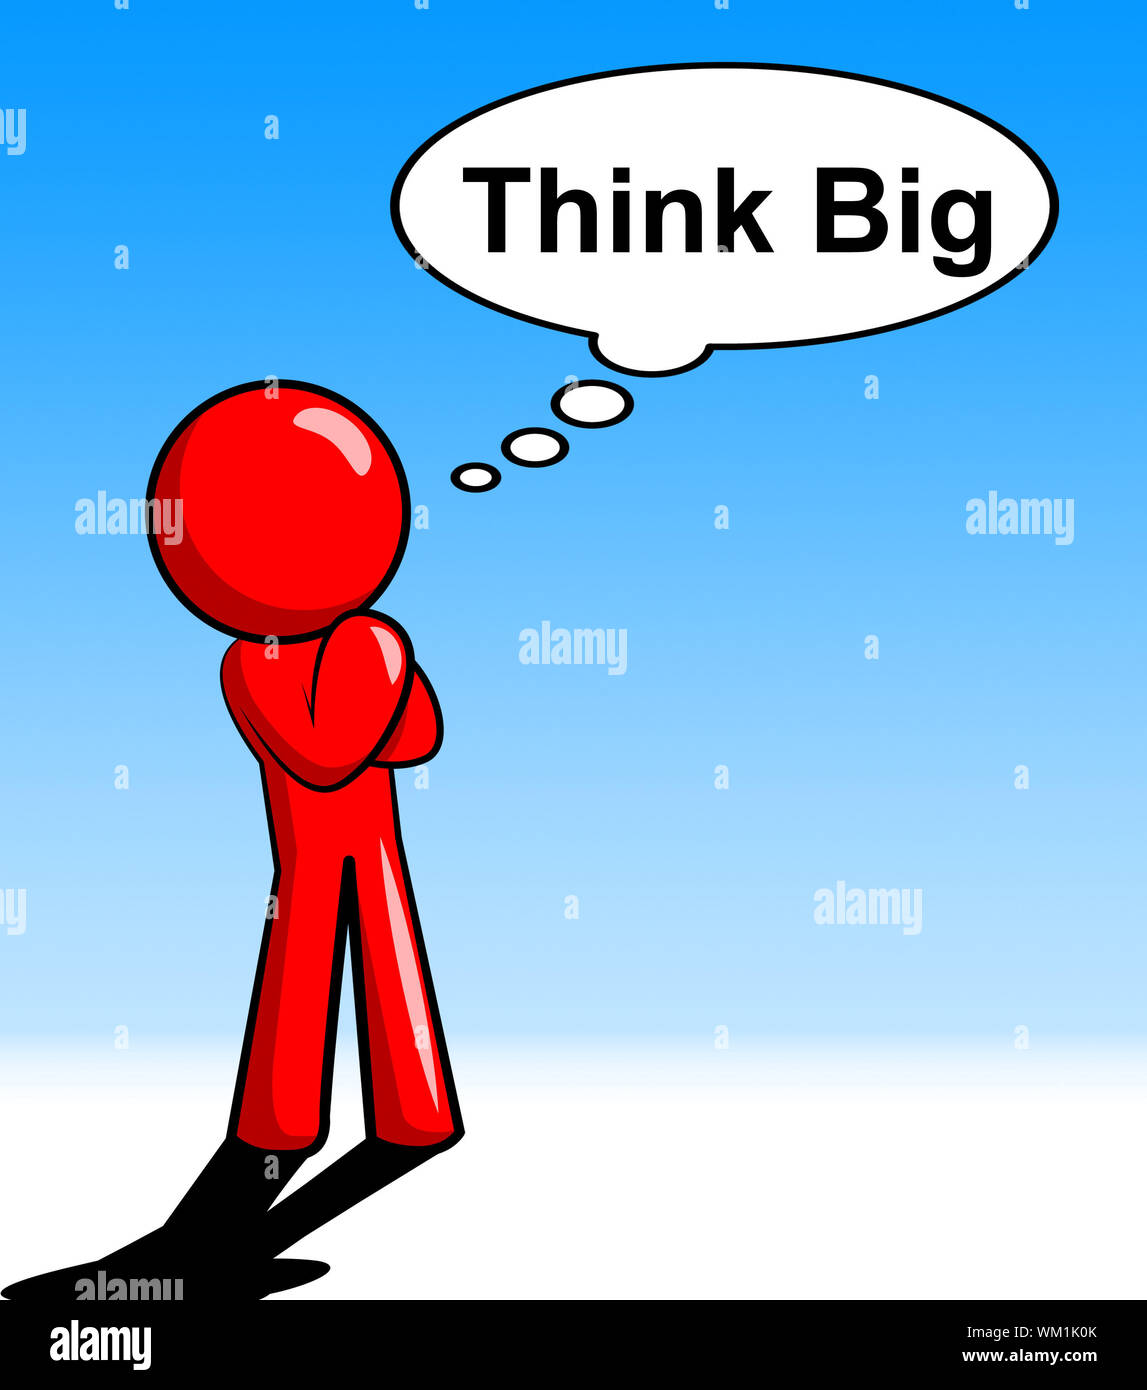 Think Big Meaning Plan Of Action And Planning Stock Photo